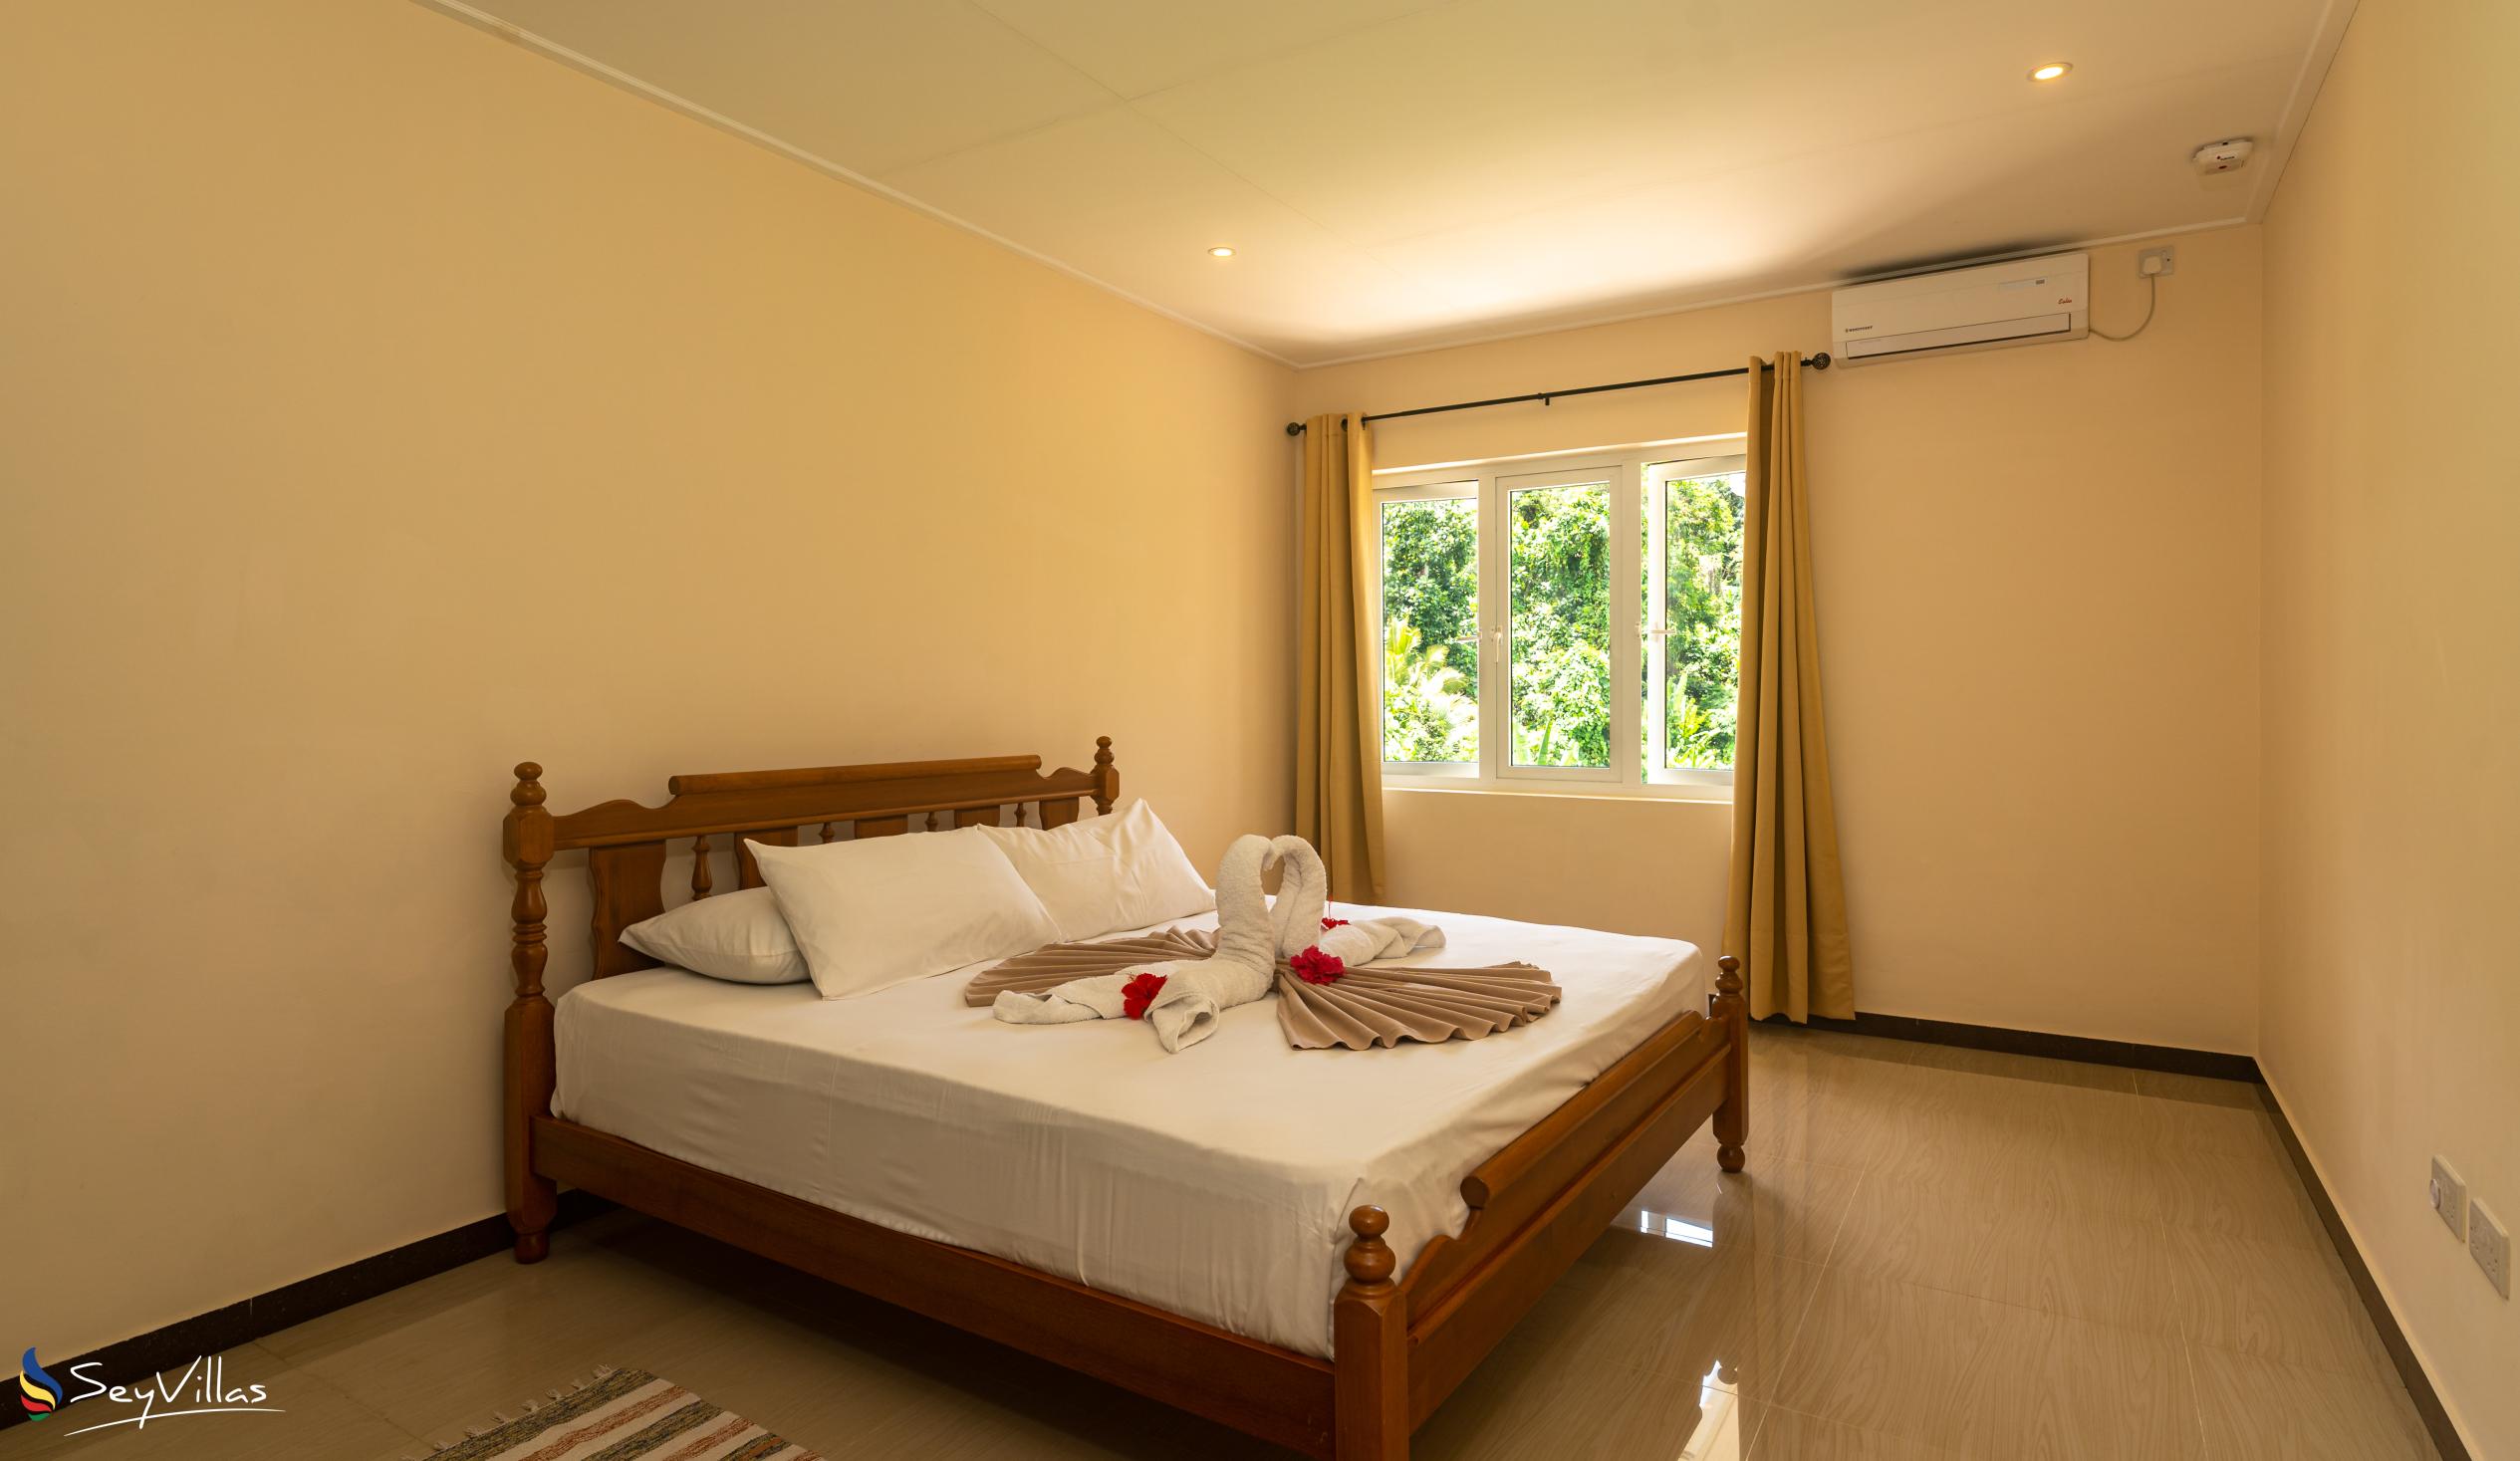 Foto 51: JAIDSS Holiday Apartments - Appartement 2 chambres - Mahé (Seychelles)